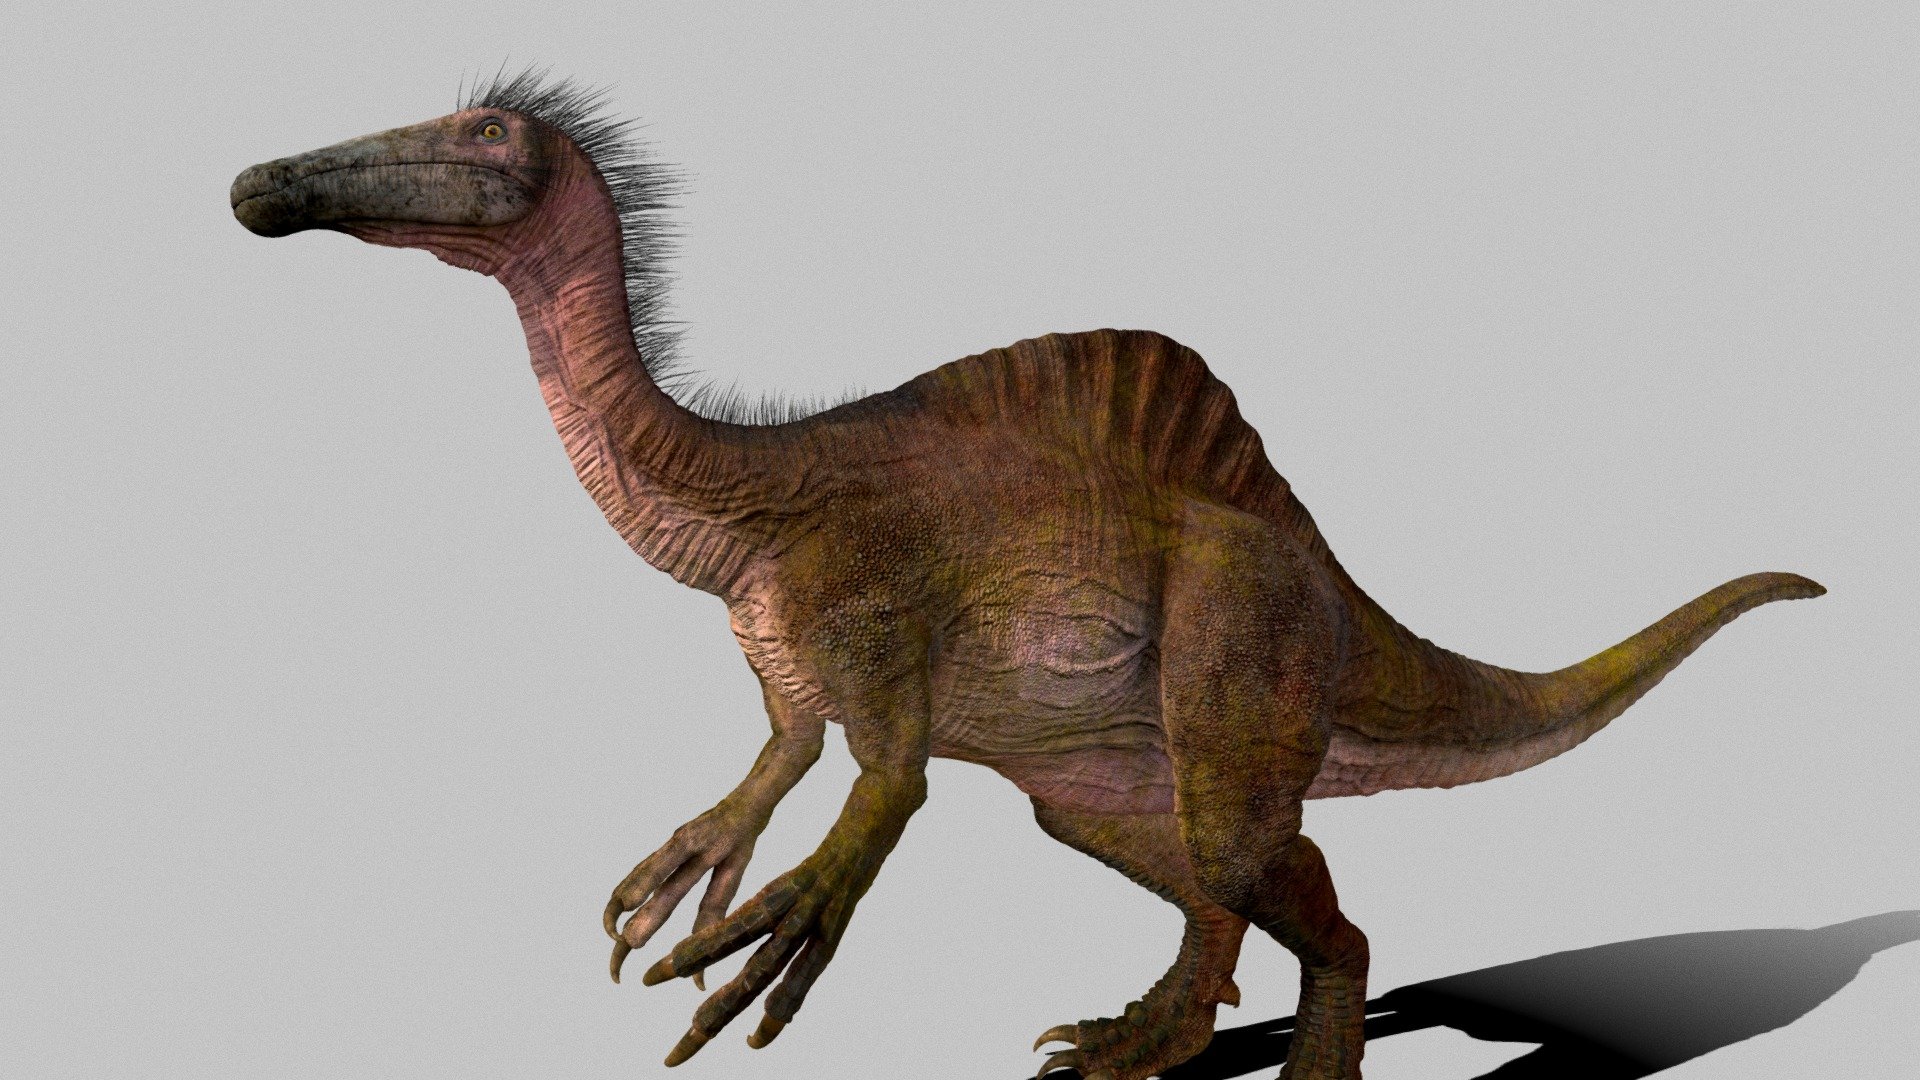 Deinocheirus is a genus of large ornithomimosaur that lived during the Late Cretaceous around 70 million years ago

Deinocheirus was an unusual ornithomimosaur, the largest of the clade at 11 m (36 ft) long, and weighing 6.4 t (7.1 short tons). Though it was a bulky animal, it had many hollow bones which saved weight. The arms were among the largest of any bipedal dinosaur at 2.4 m (7.9 ft) long, with large claws on its three-fingered hands.

Instagram https://www.instagram.com/julian_johnson1234/ - Deinocheirus - Download Free 3D model by Julian Johnson-Mortimer (@FreddyFoxFreddy) 3d model